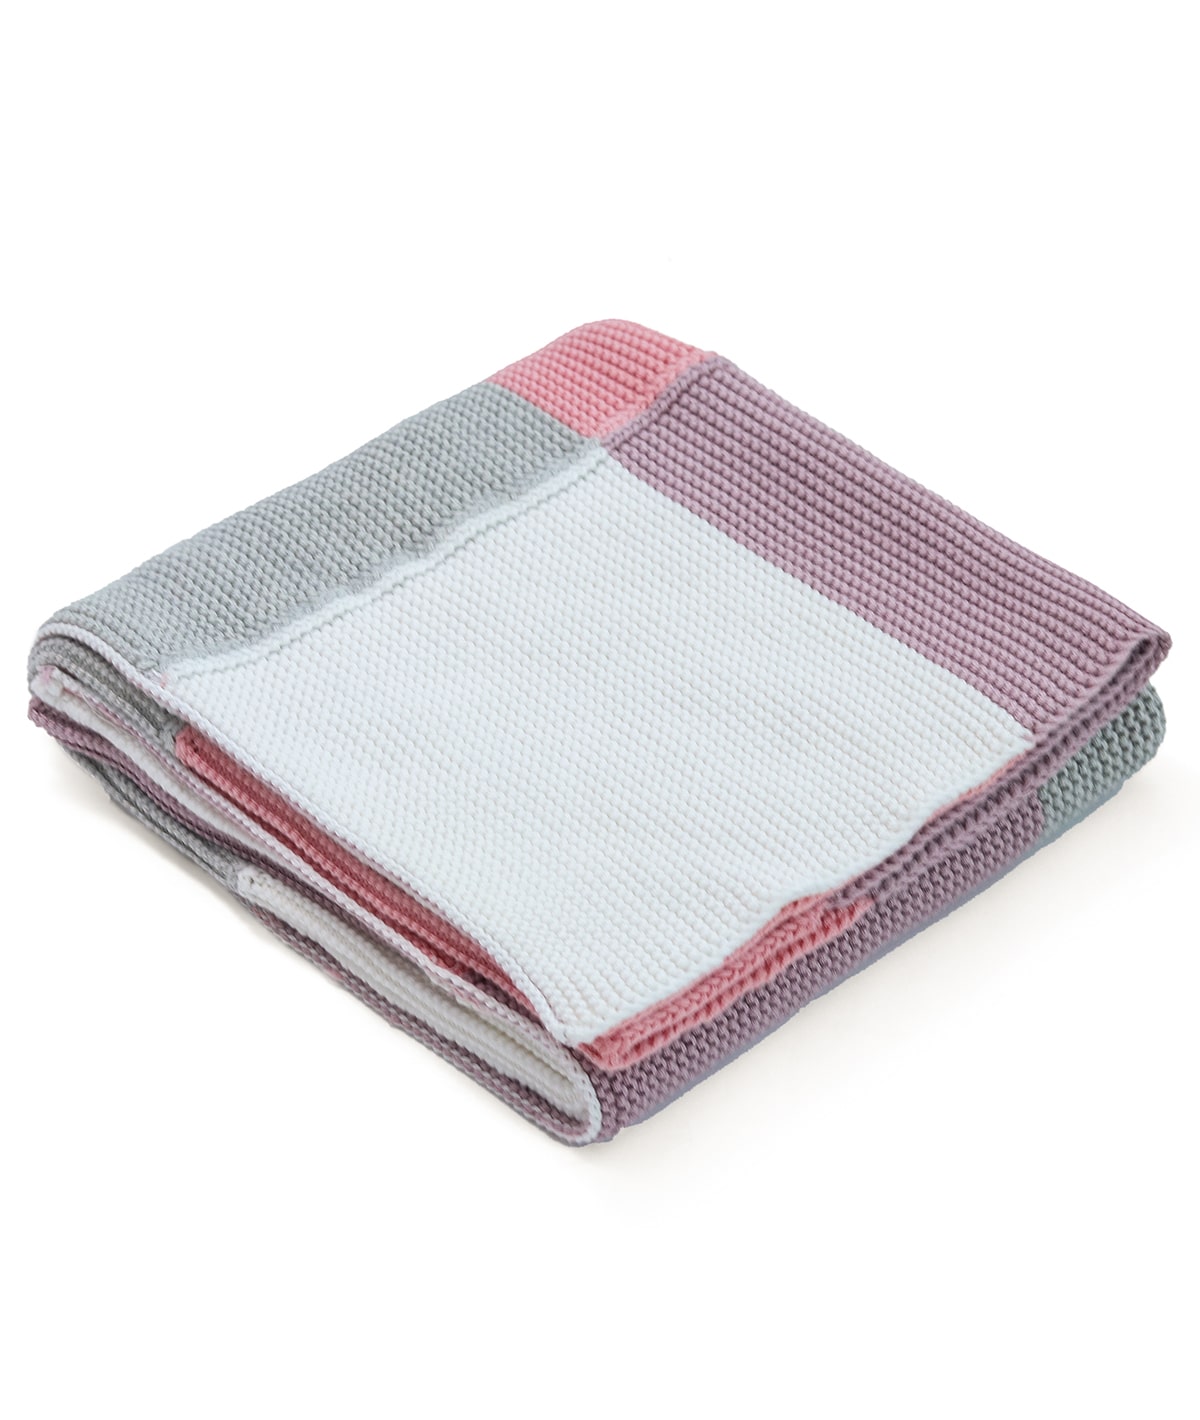 Transfer Knit Color Blocks with Stripes- Bubblegum Pink Color Cotton Knitted Ac Blanket For Baby / Infant / New Born For Use In All Seasons